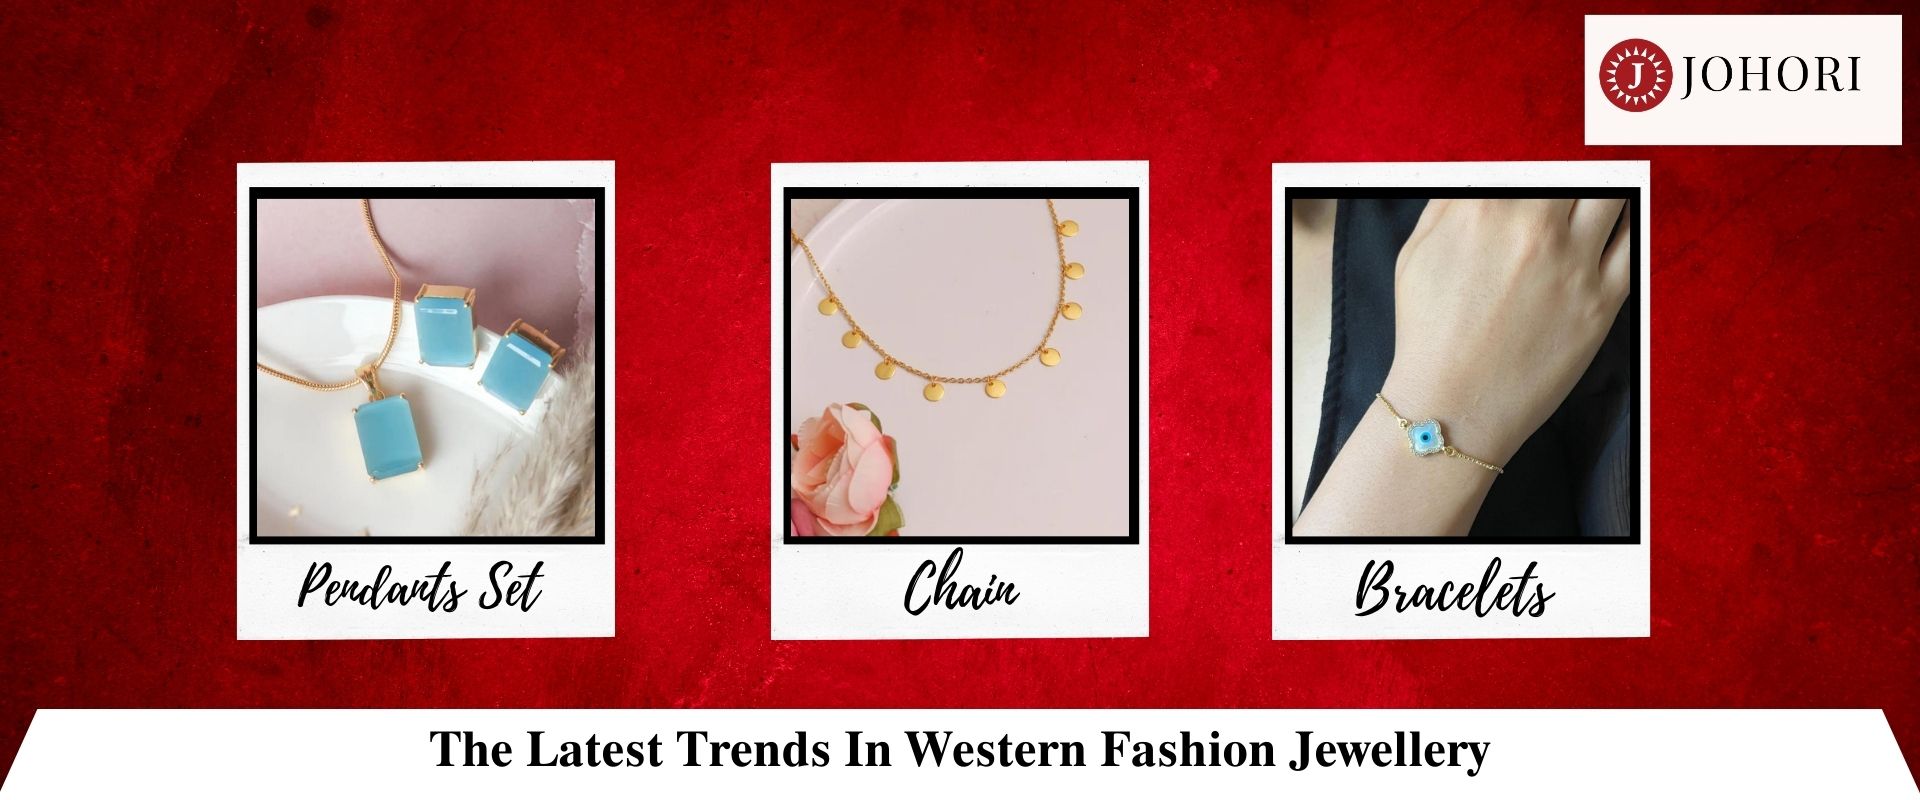 The Latest Trends In Western Fashion Jewellery